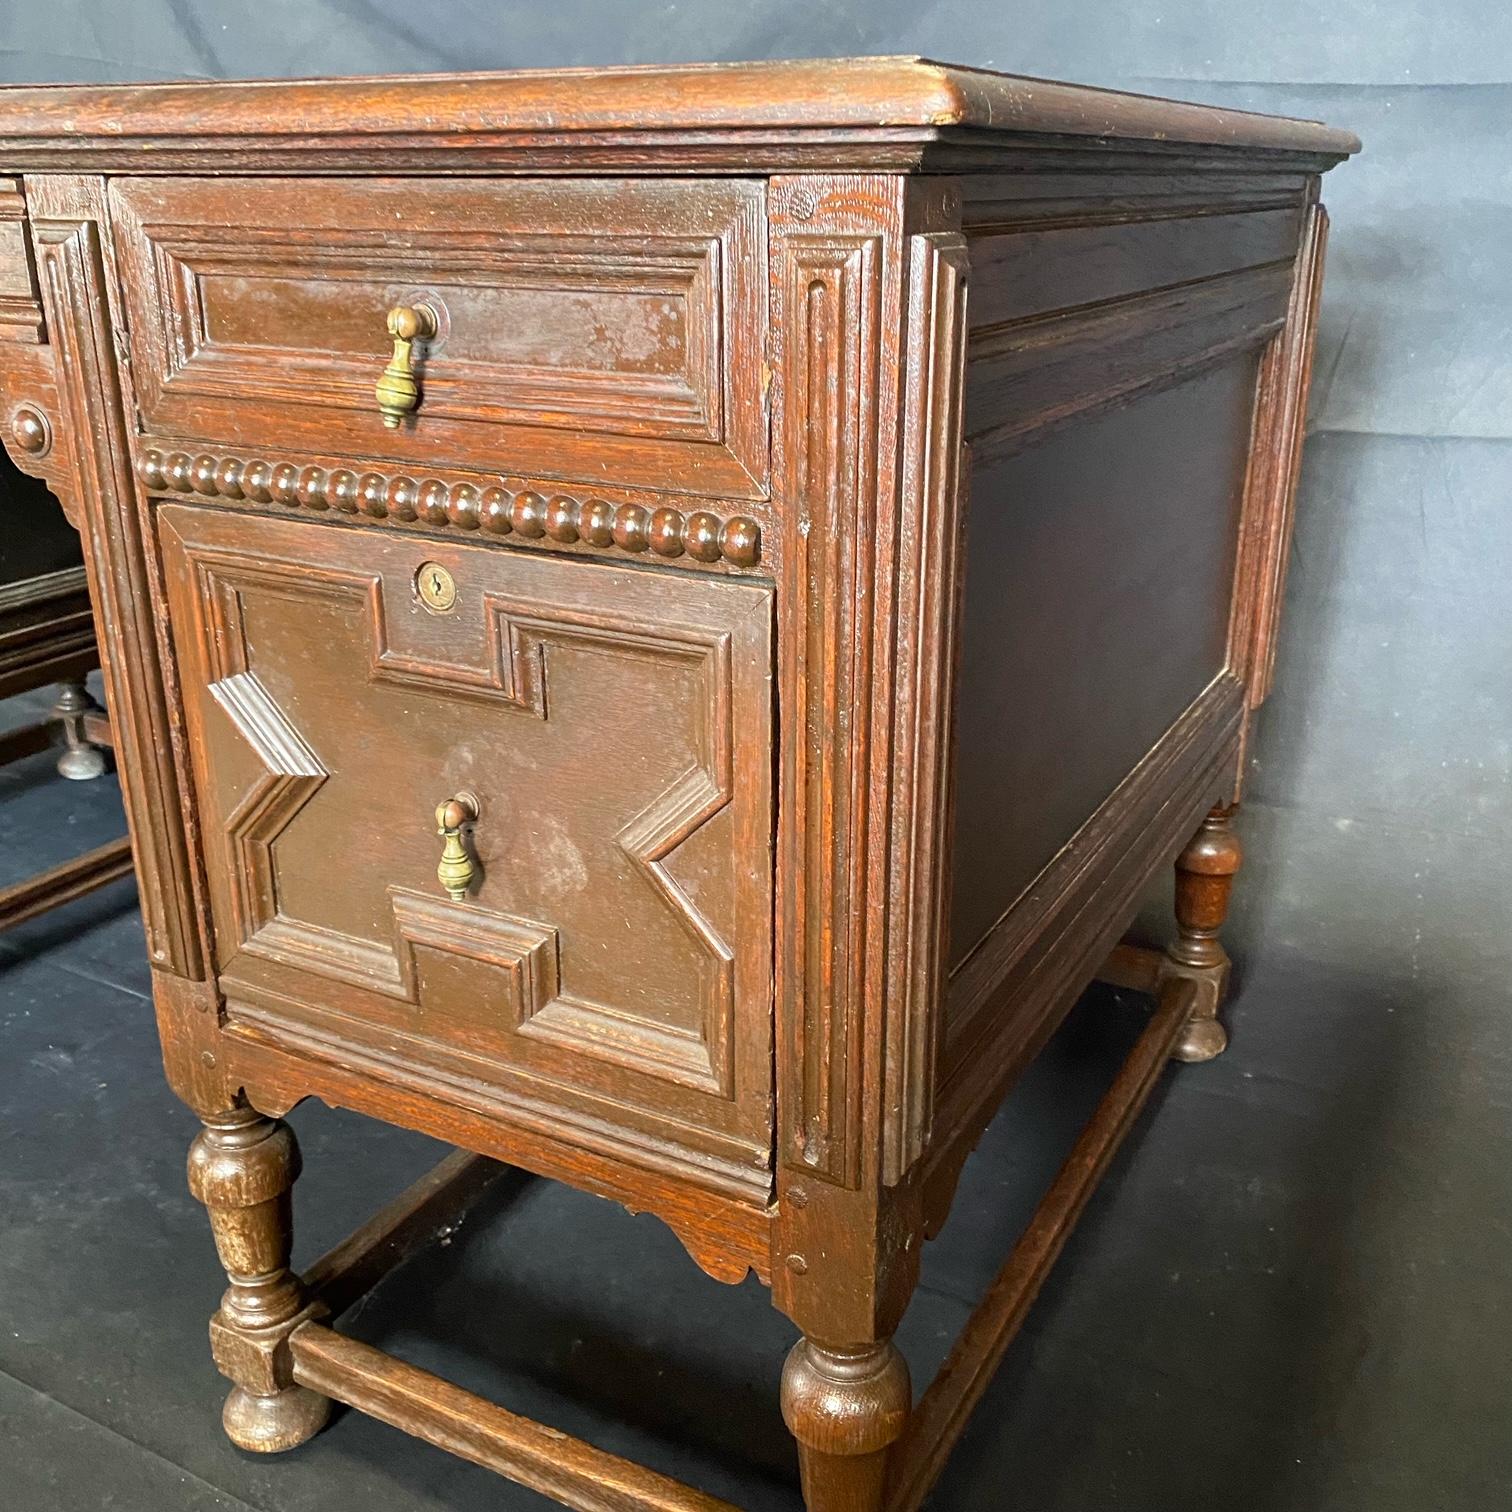 Fine and impressive early 20th century oak writing table or desk having beautiful details and plenty of storage. Details on both sides allows placement in the middle of a room. Very well done dovetailed drawers and reeded columned corners.